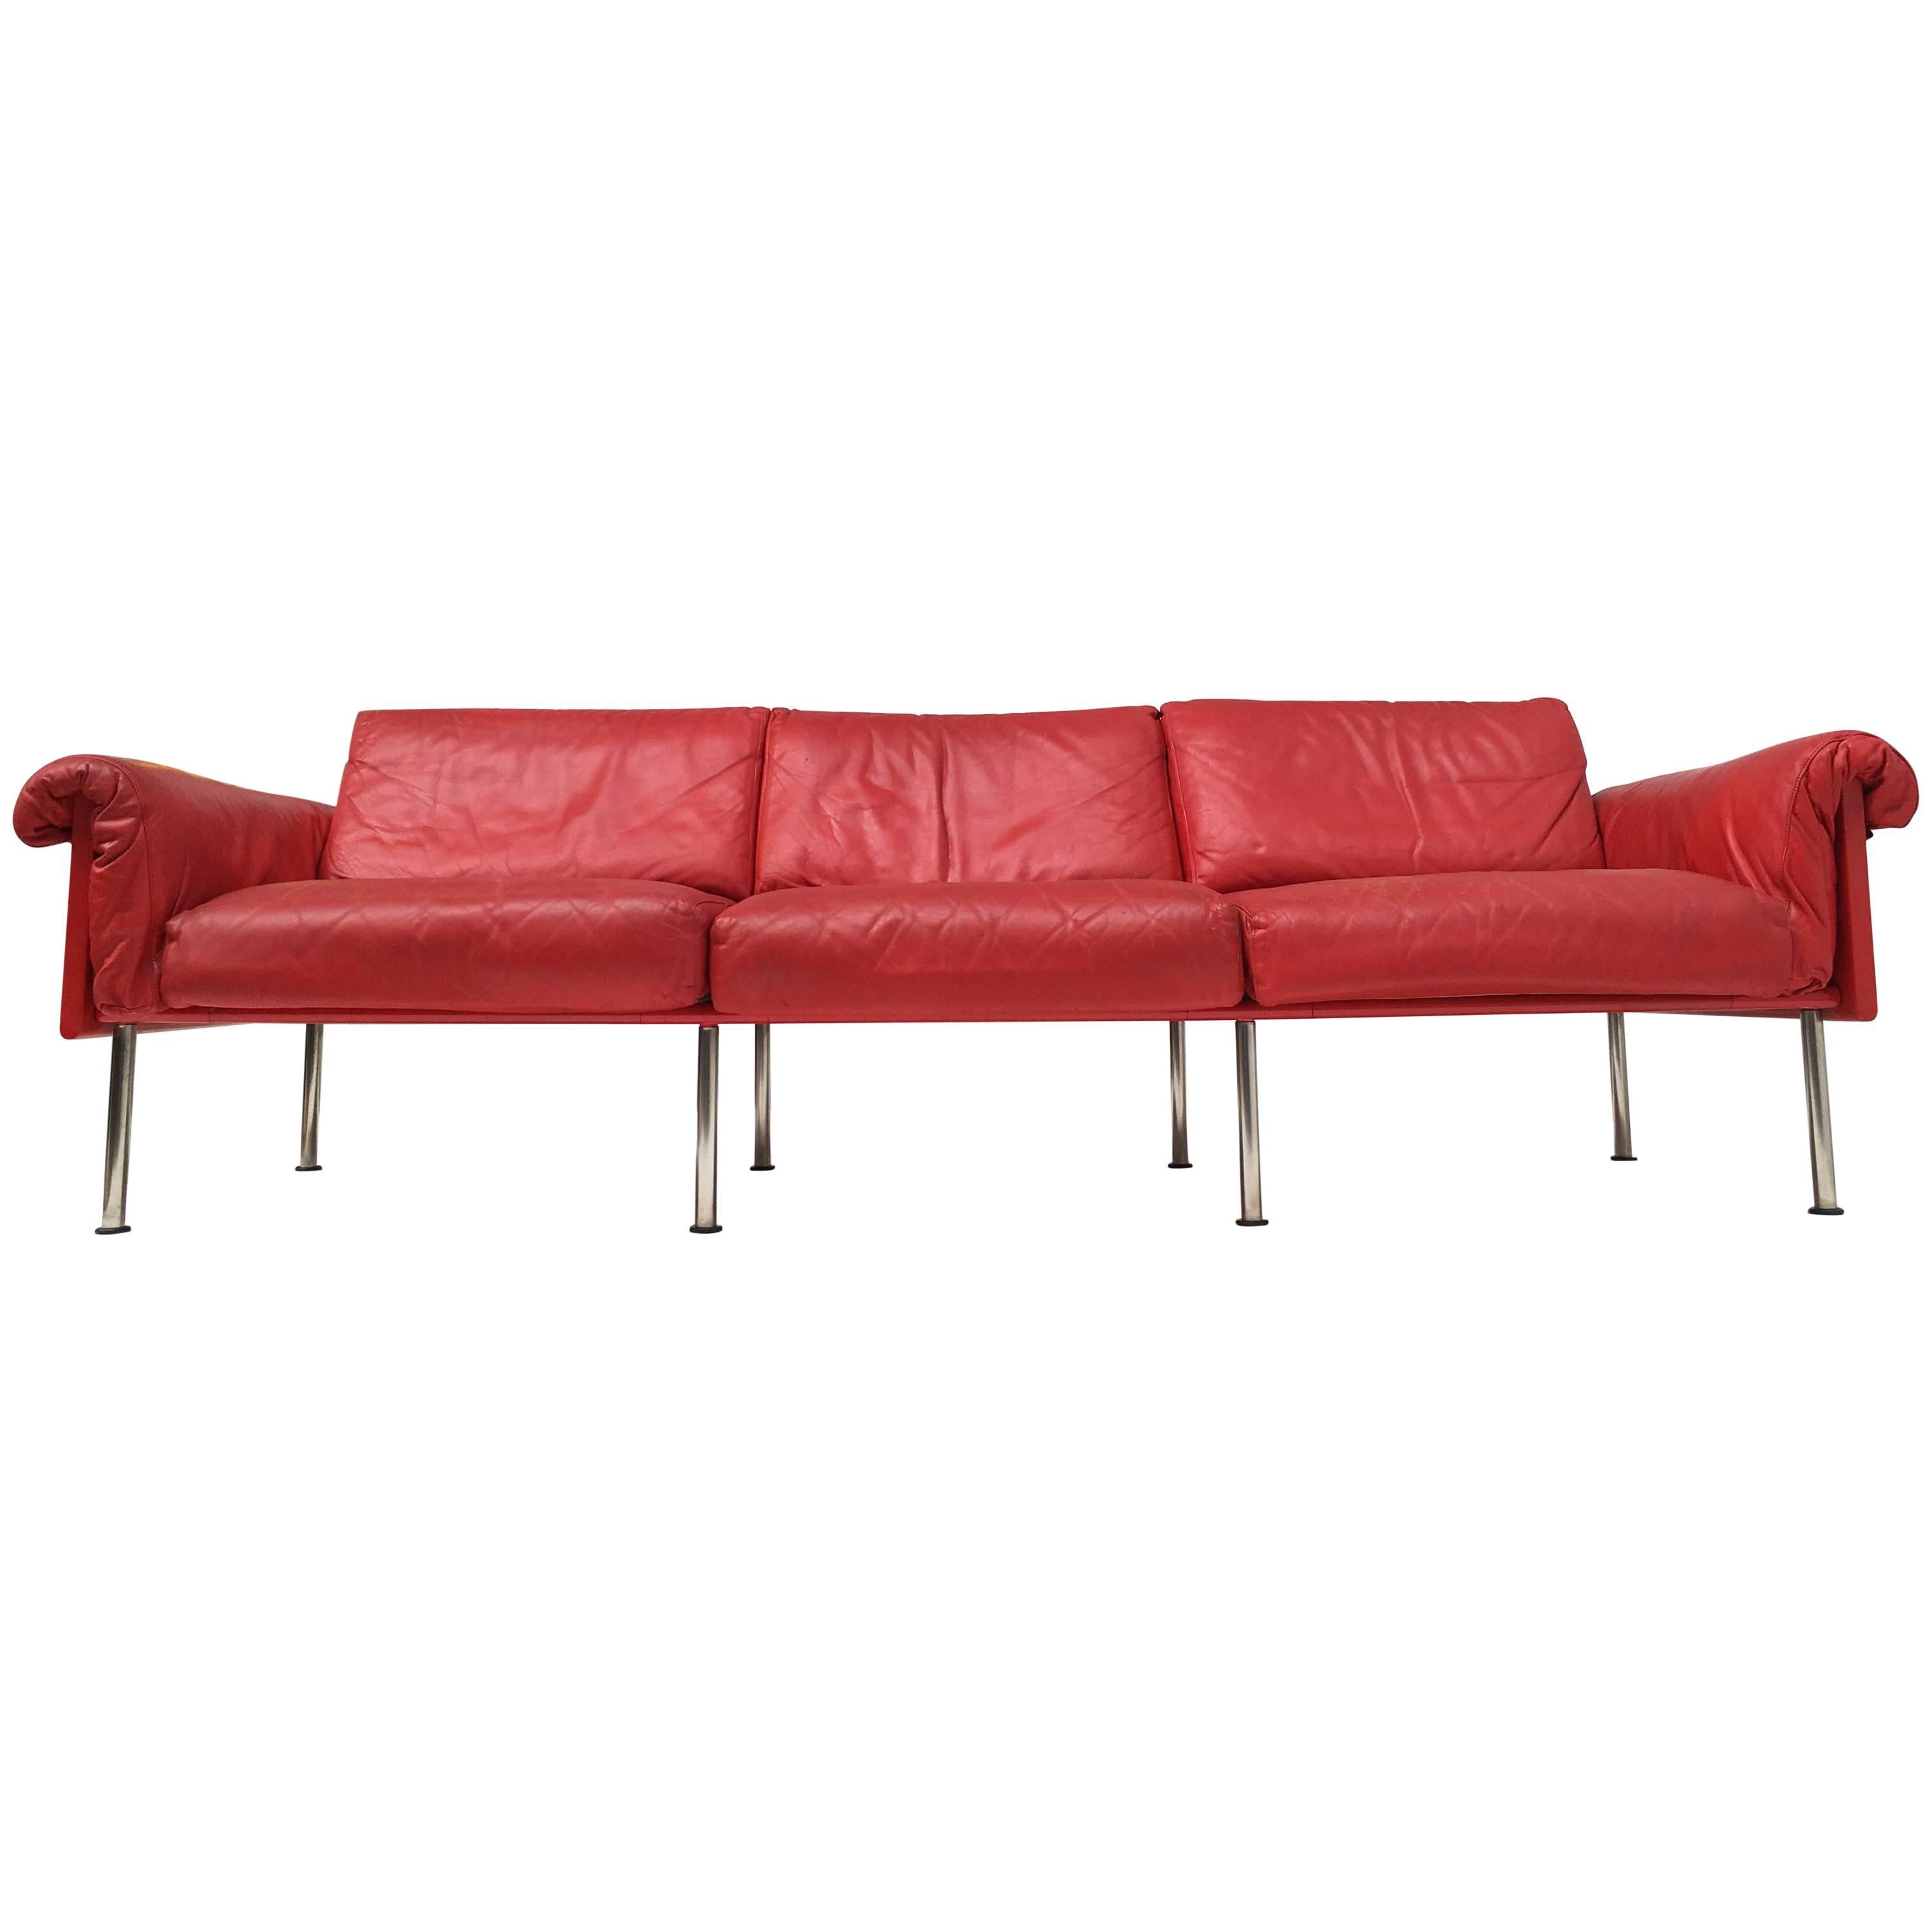 Eclectic Red Leather 'Ateljee' Sofa by Yrjo Kukkapuro for Haimi Finland, 1963 For Sale